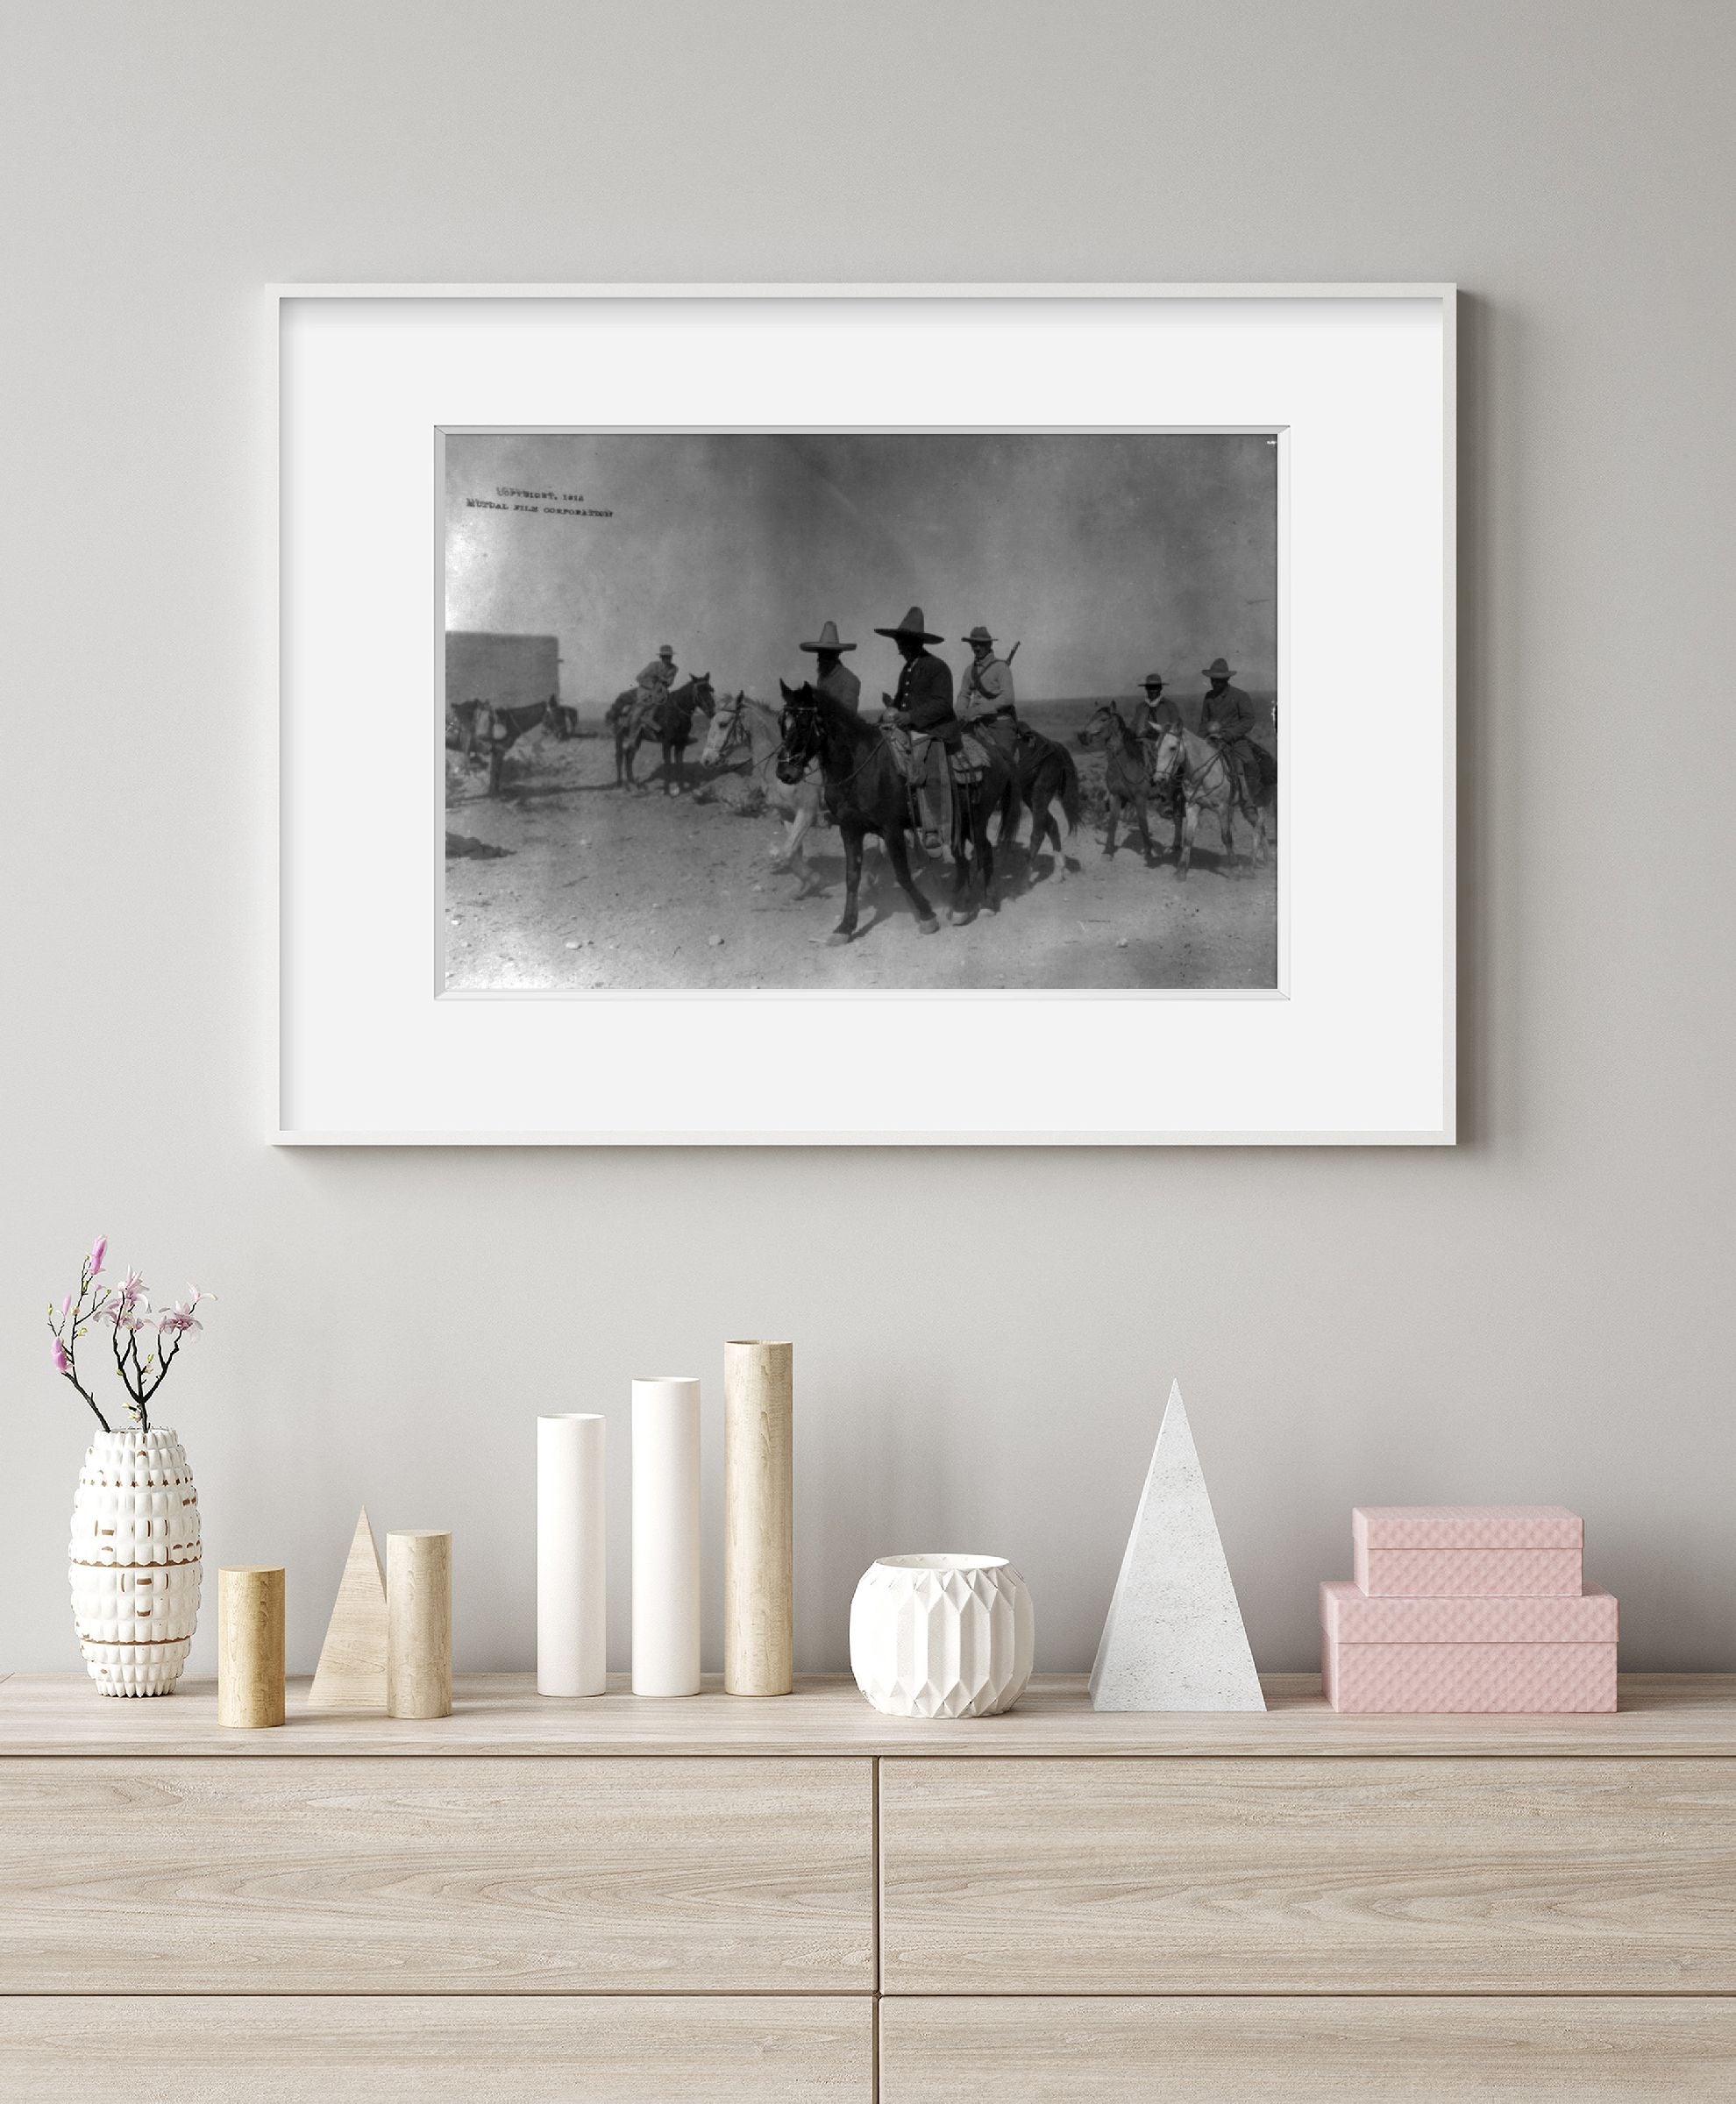 c1914 Jan. 29 photograph of Mexican War, 1914: 6 mounted rebels